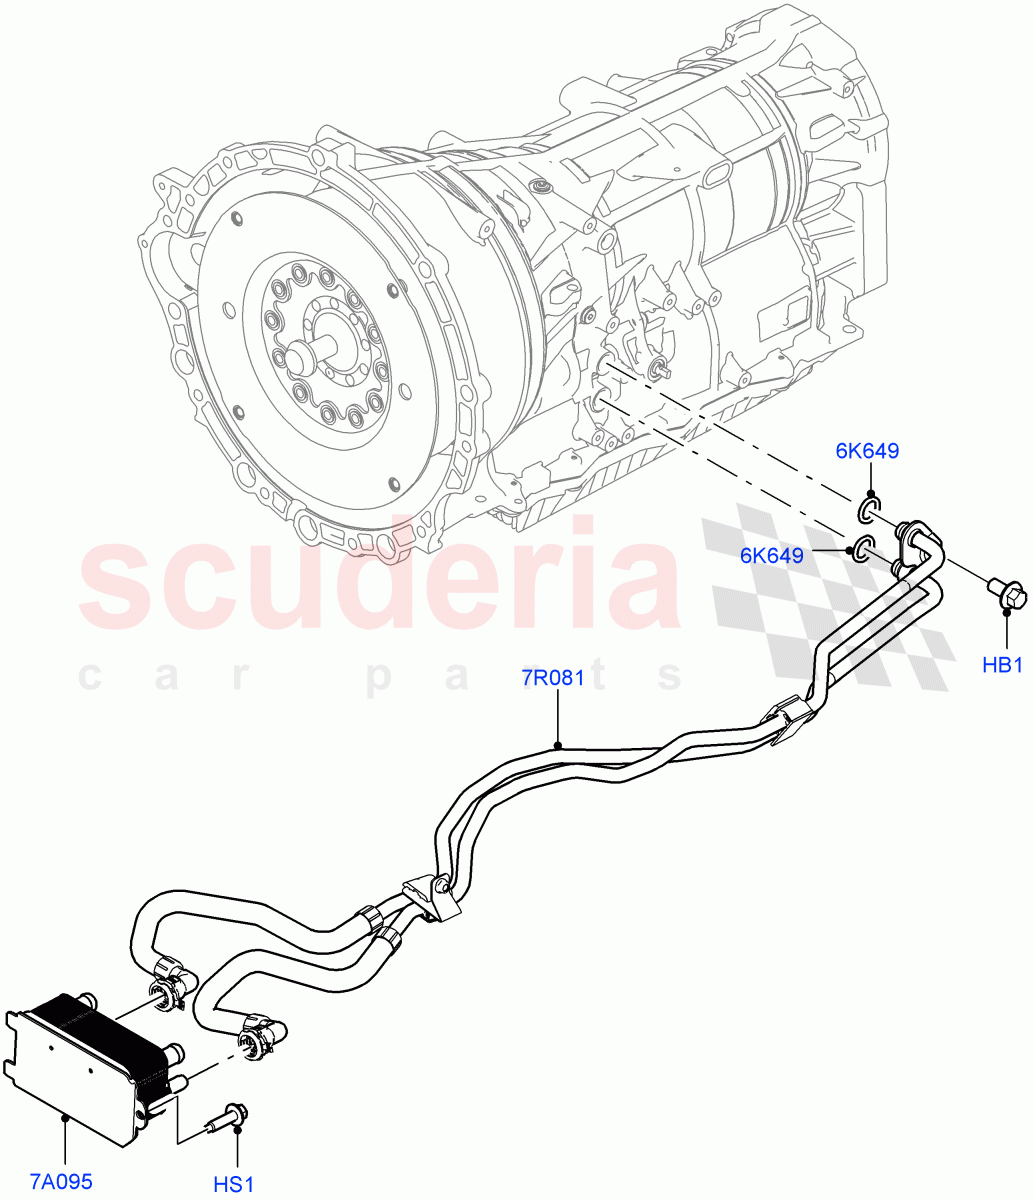 Transmission Cooling Systems(Solihull Plant Build)(2.0L I4 High DOHC AJ200 Petrol,8 Speed Auto Trans ZF 8HP45)((V)FROMJA000001) of Land Rover Land Rover Range Rover Sport (2014+) [5.0 OHC SGDI SC V8 Petrol]